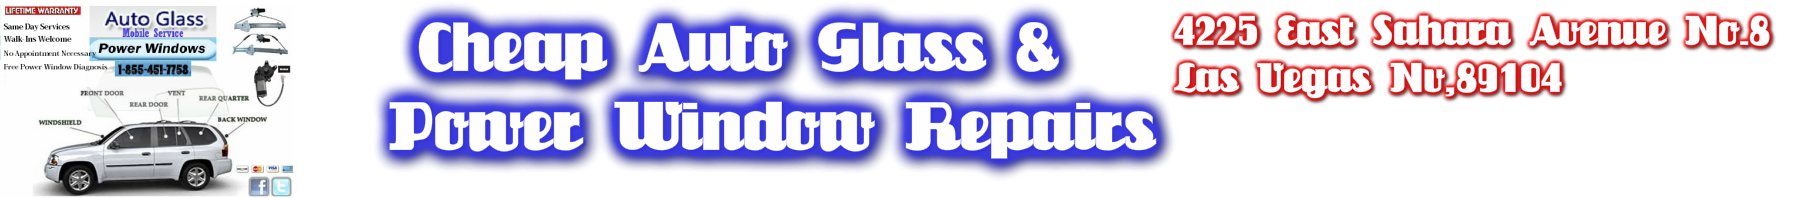 Auto Glass Services In Las Vegas Nevada , Auto Glass Repairs, Auto Glass Replacements, Windshield Repairs,Windshield Replacements,Mobile Auto Window Installations,Power Window Repairs,Manual Window repairs,window regulators,window motors,window switches,o